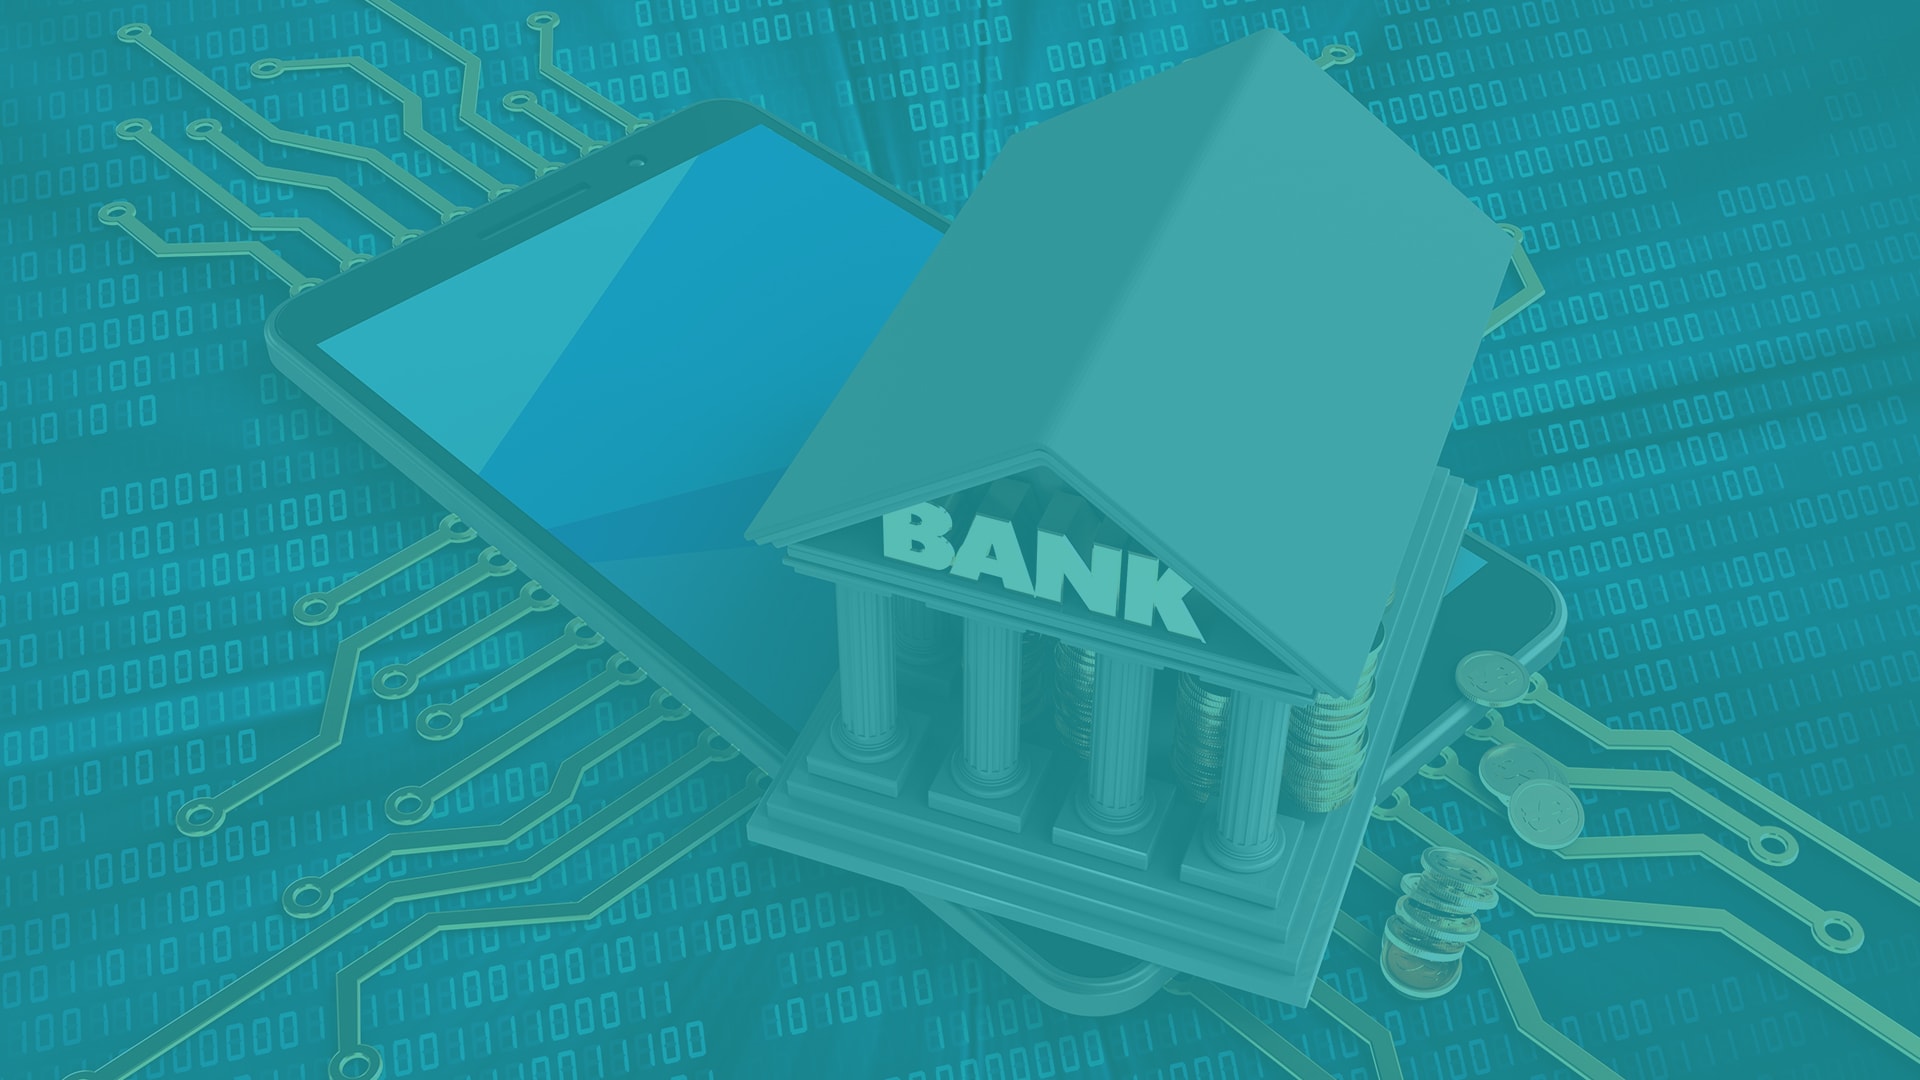 What are the benefits of CORE banking solutions?